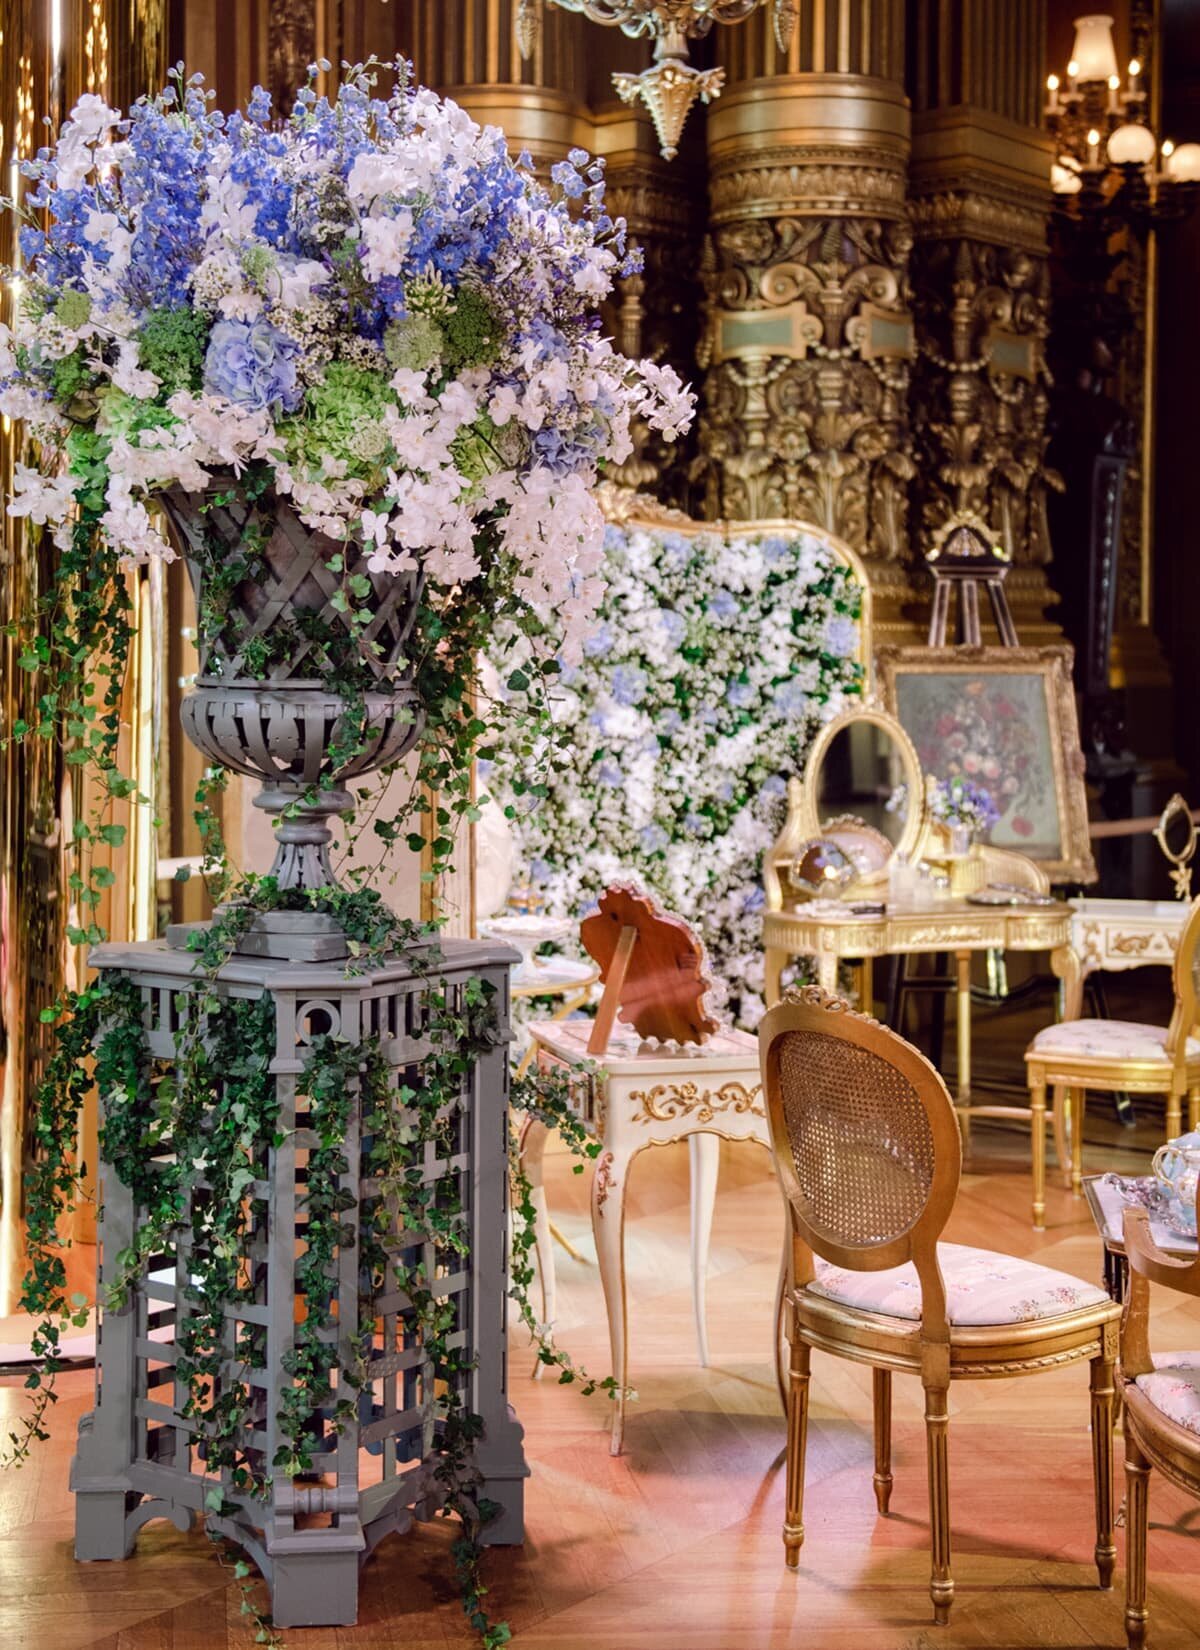 Large vase of purple flowers in ornately decorated room with gold